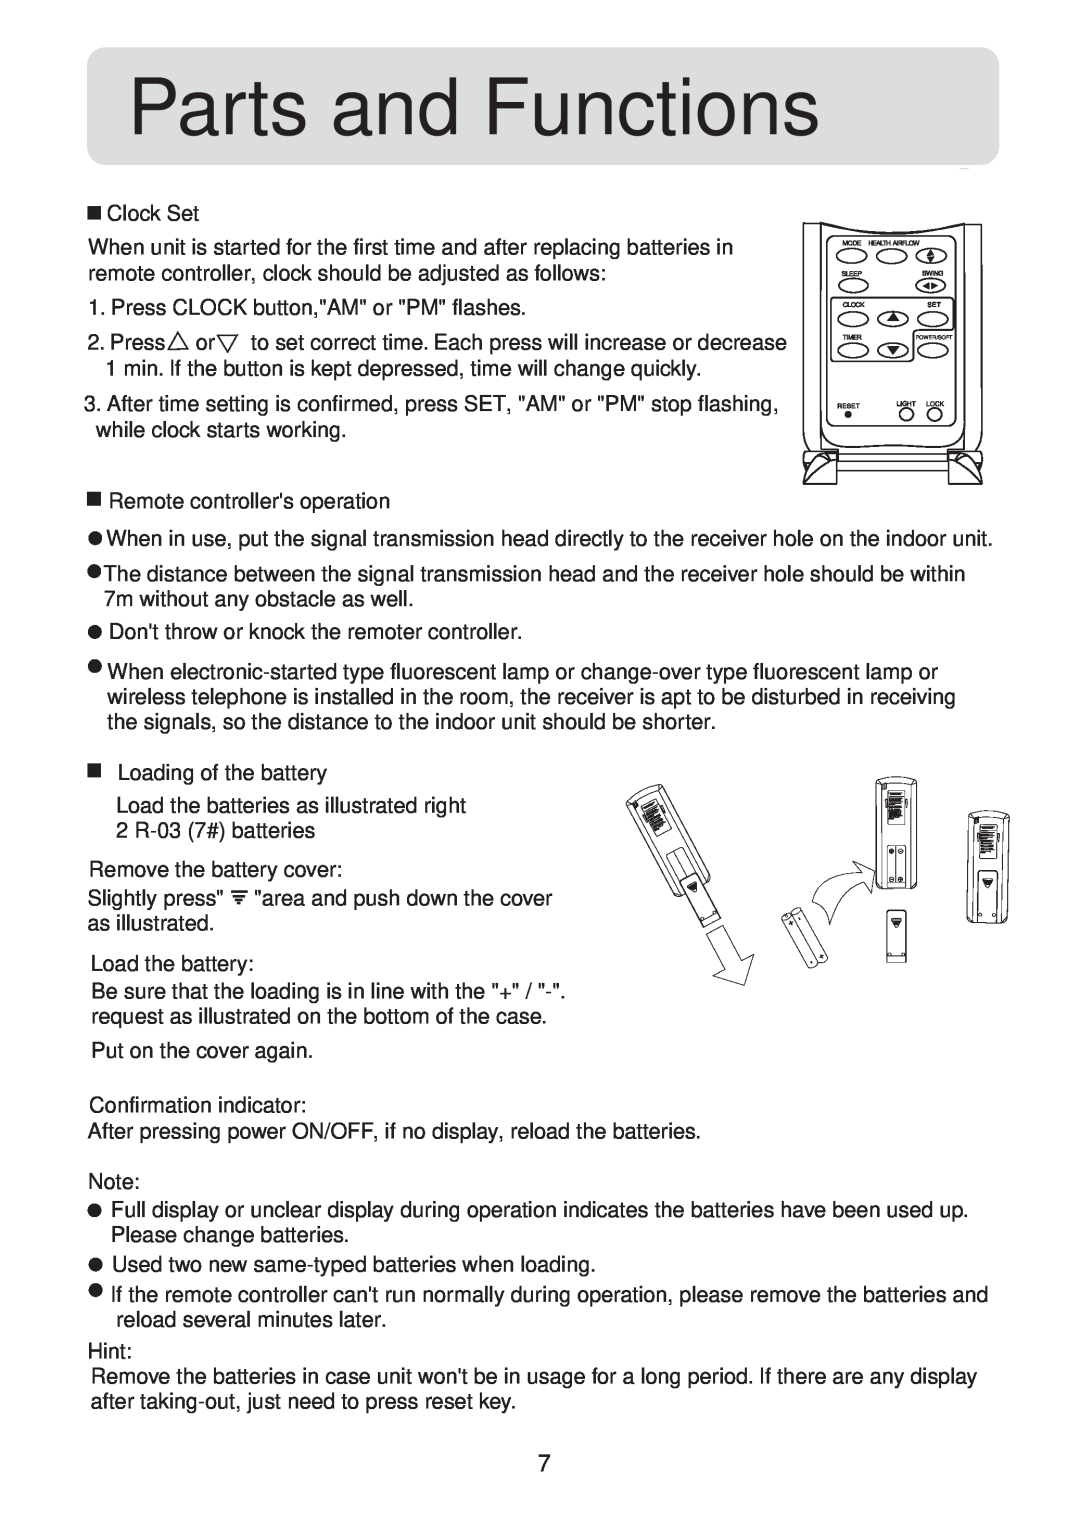 Haier HSU-09HV04, HSU-12HV04, HSU-18HV04, HSU-22HV04 operation manual Parts and Functions, Clock Set 